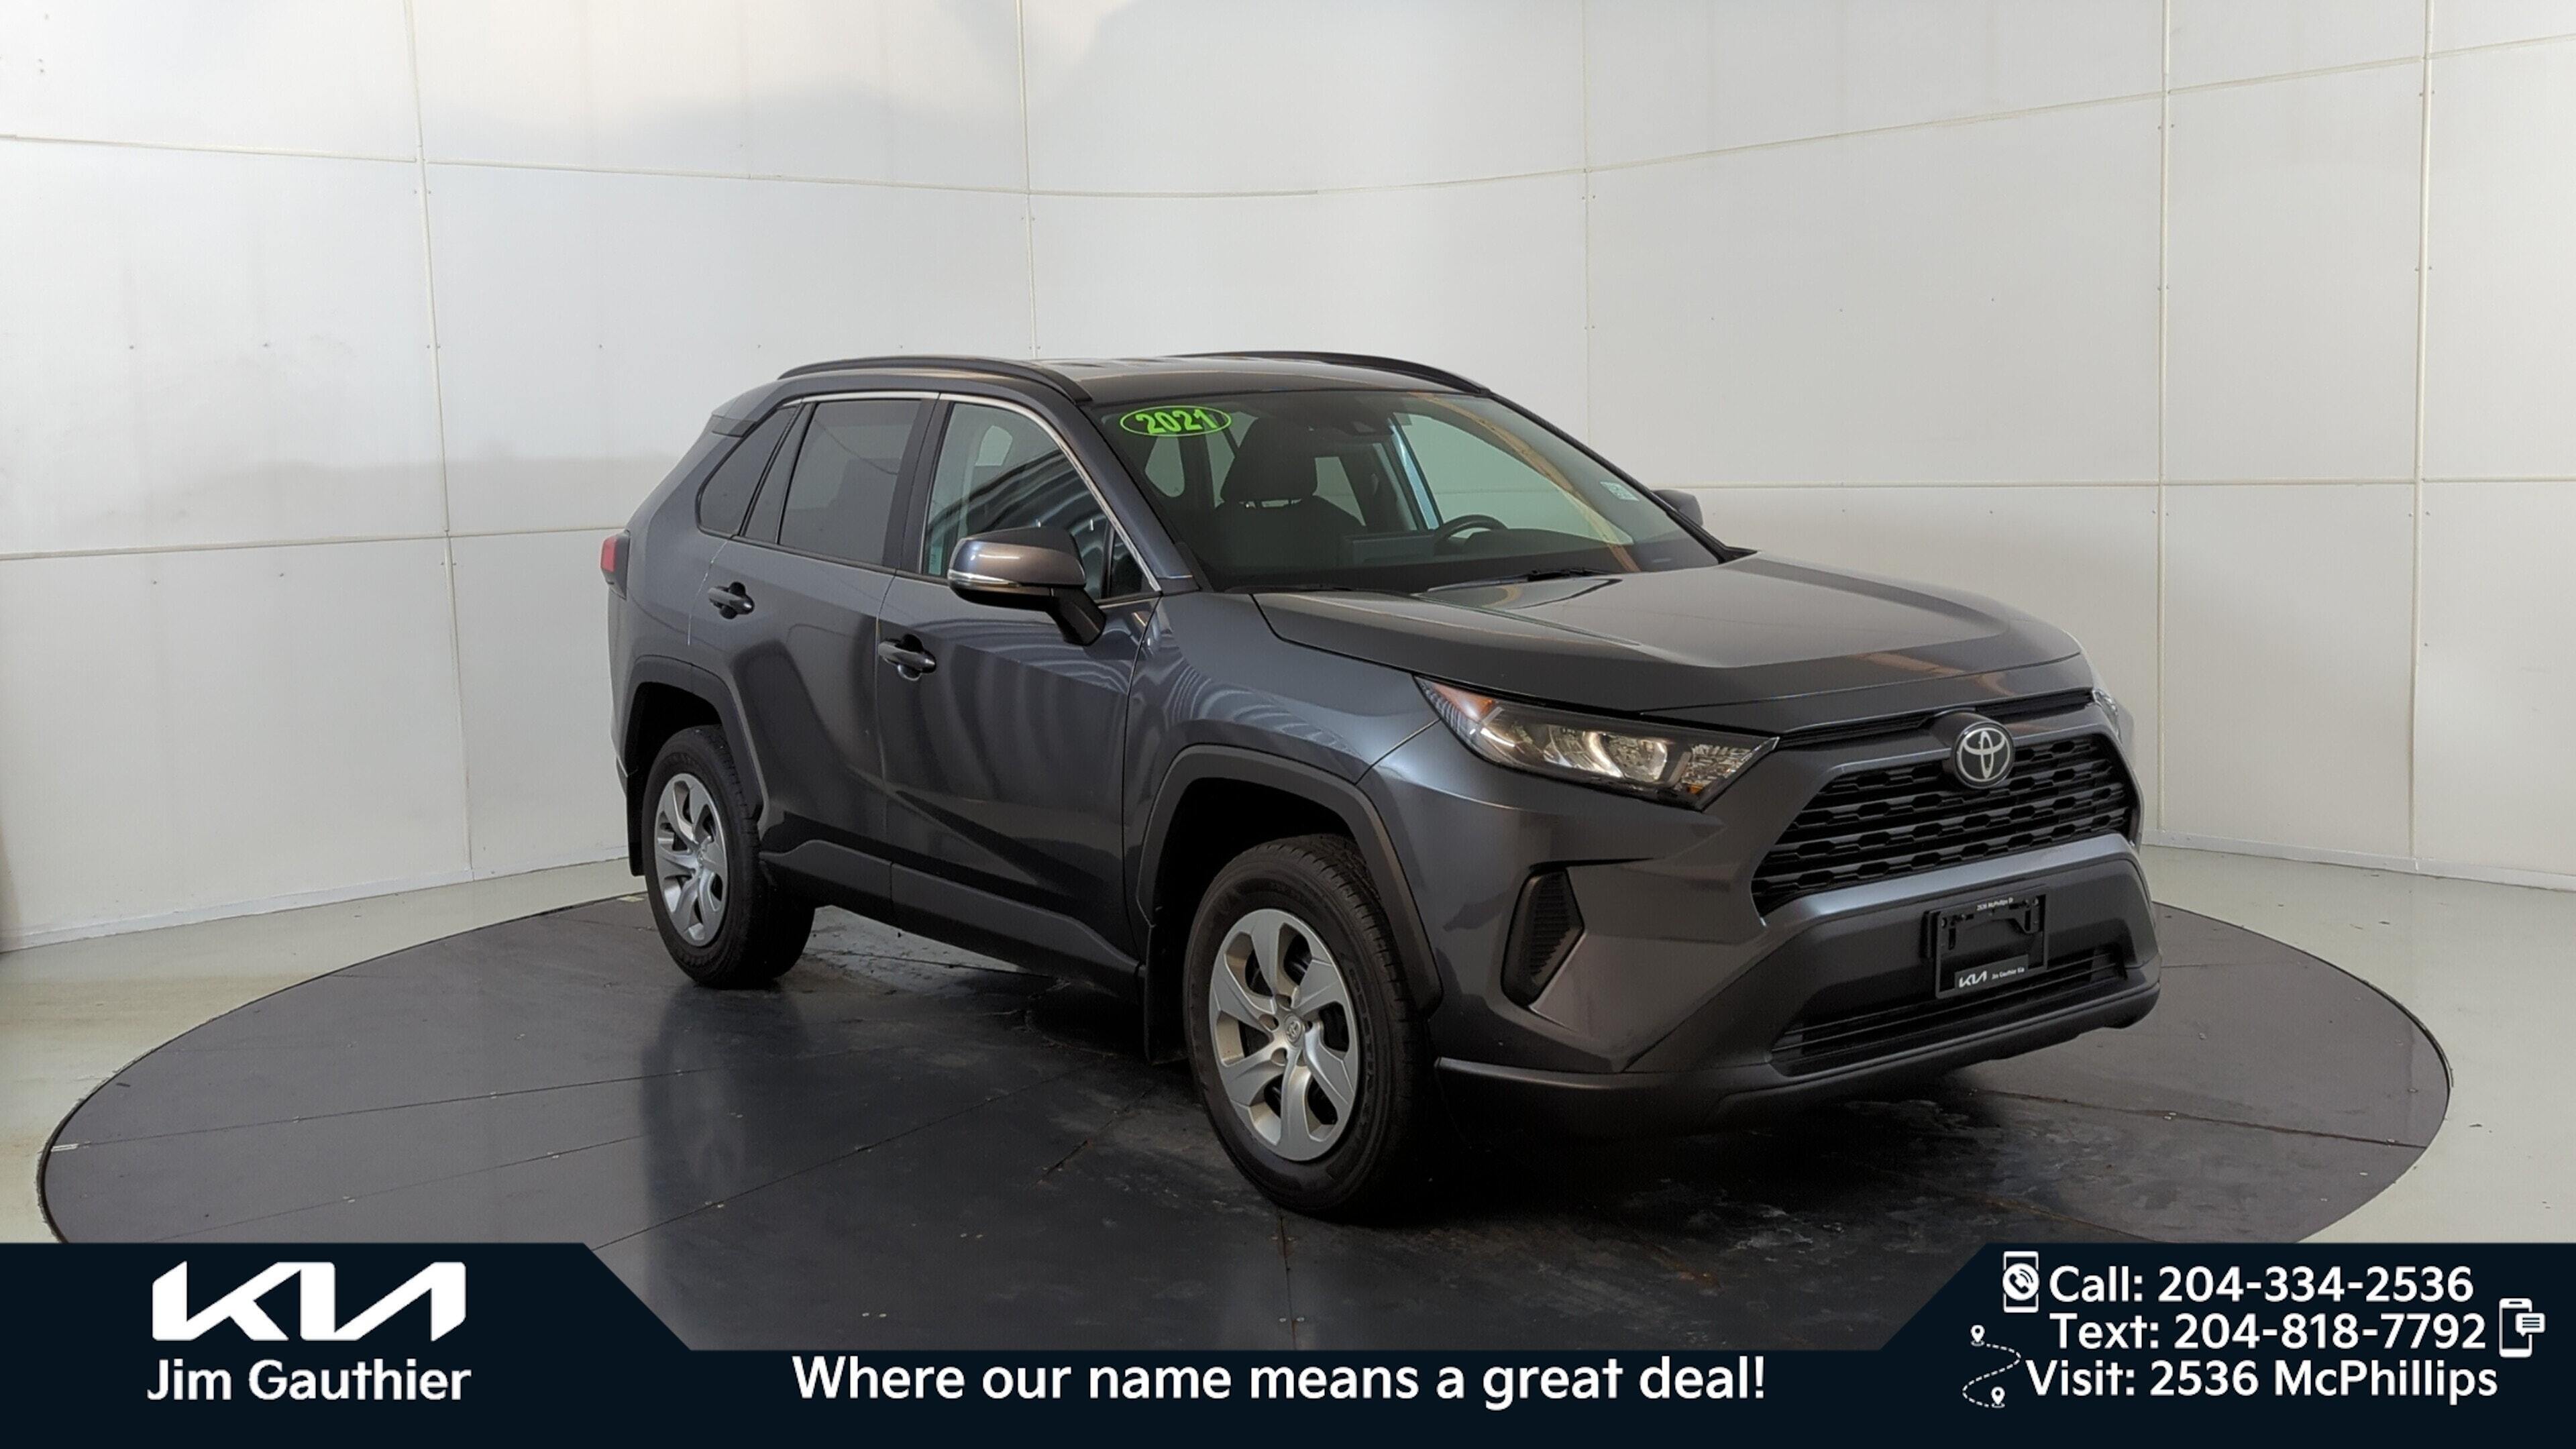 2021 Toyota RAV4 LE AWD, Accident Free, Smart Safety Features